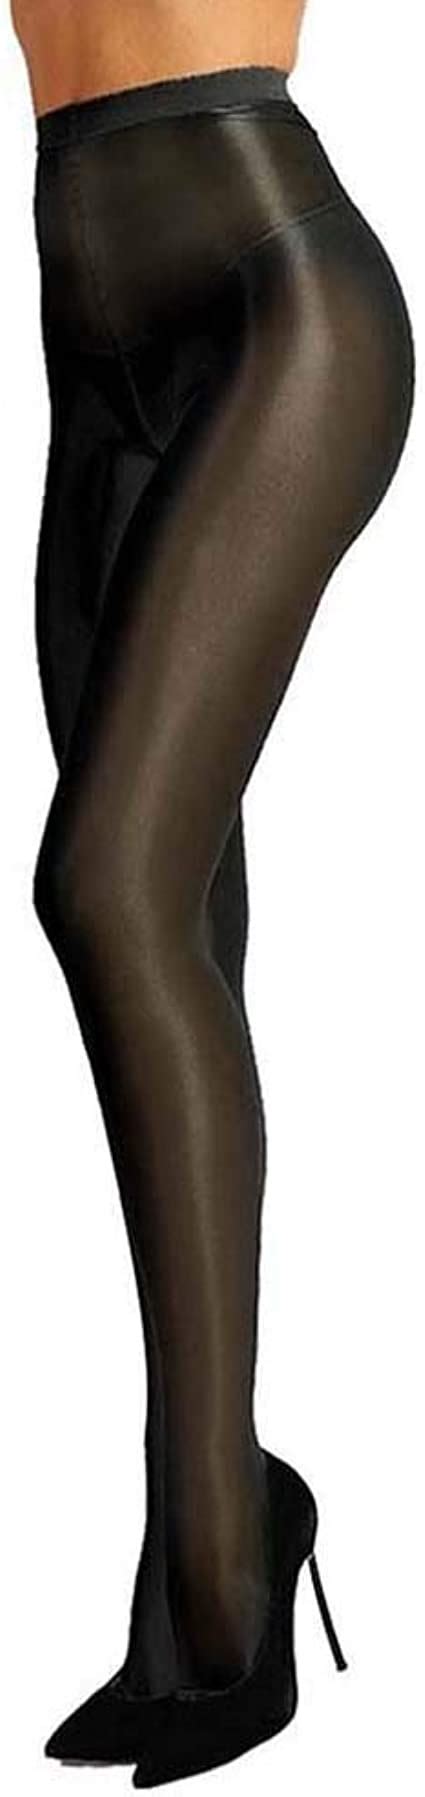 plus size women s 60d oil shiny glossy pantyhose shaping stockings sexy